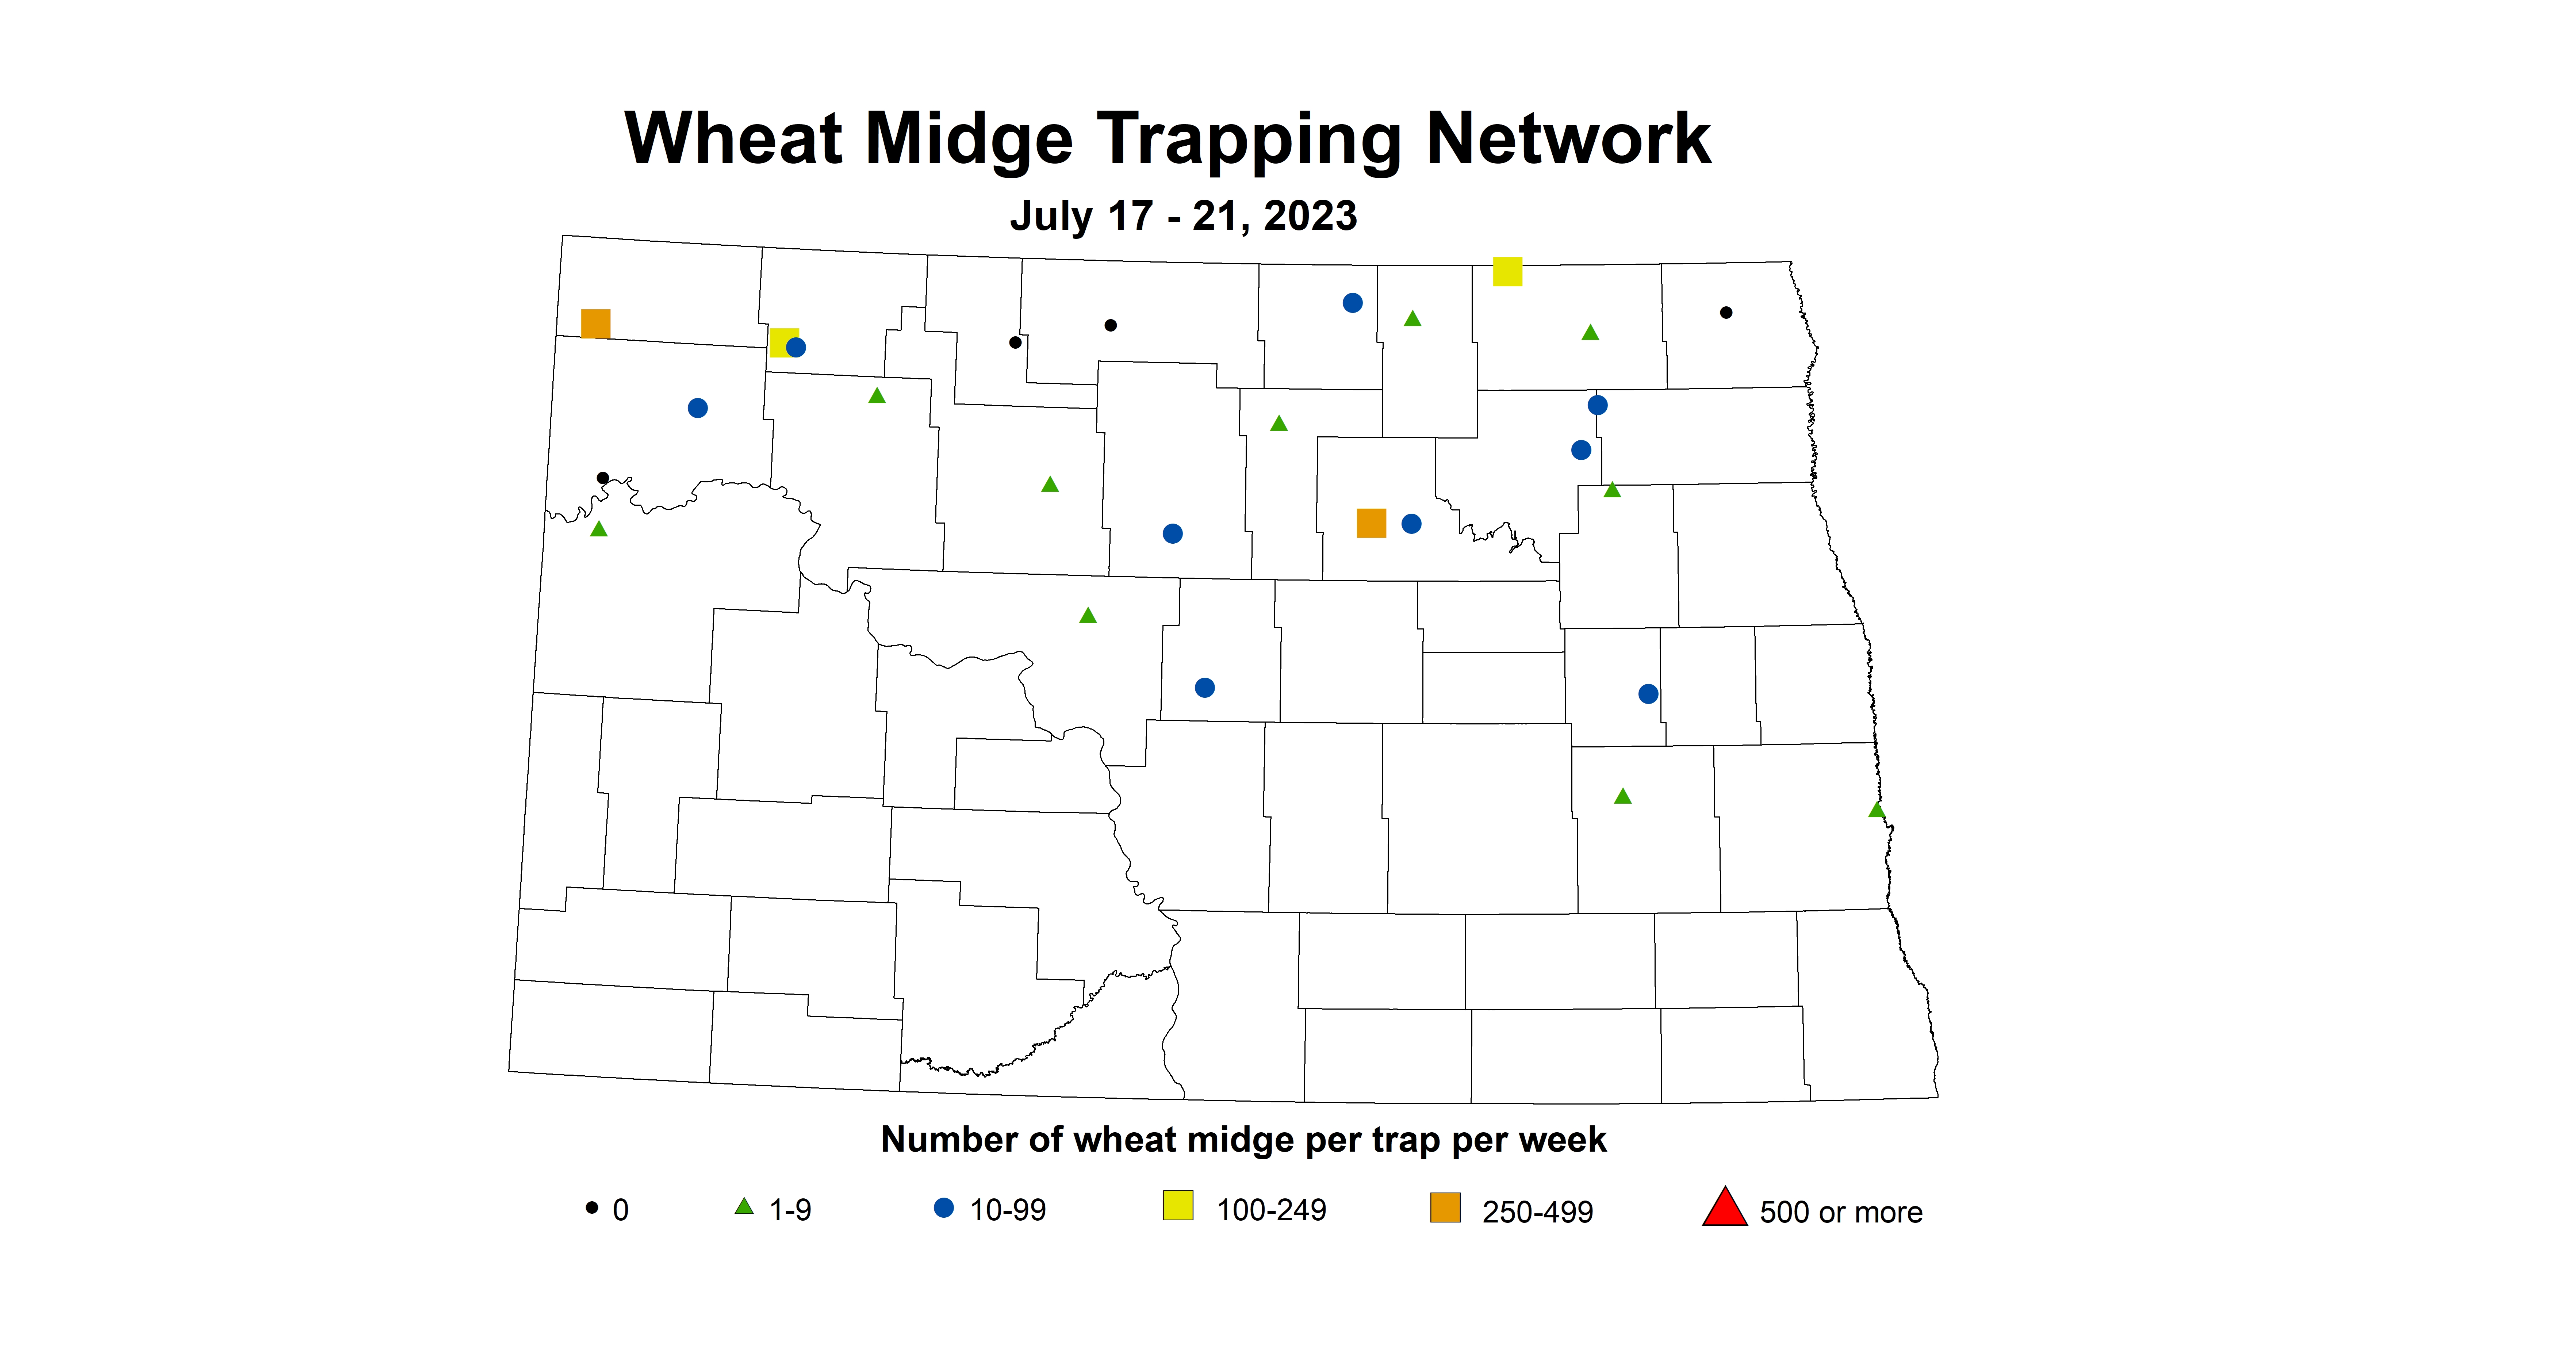 wheat midge trapping network July 17-21 2023